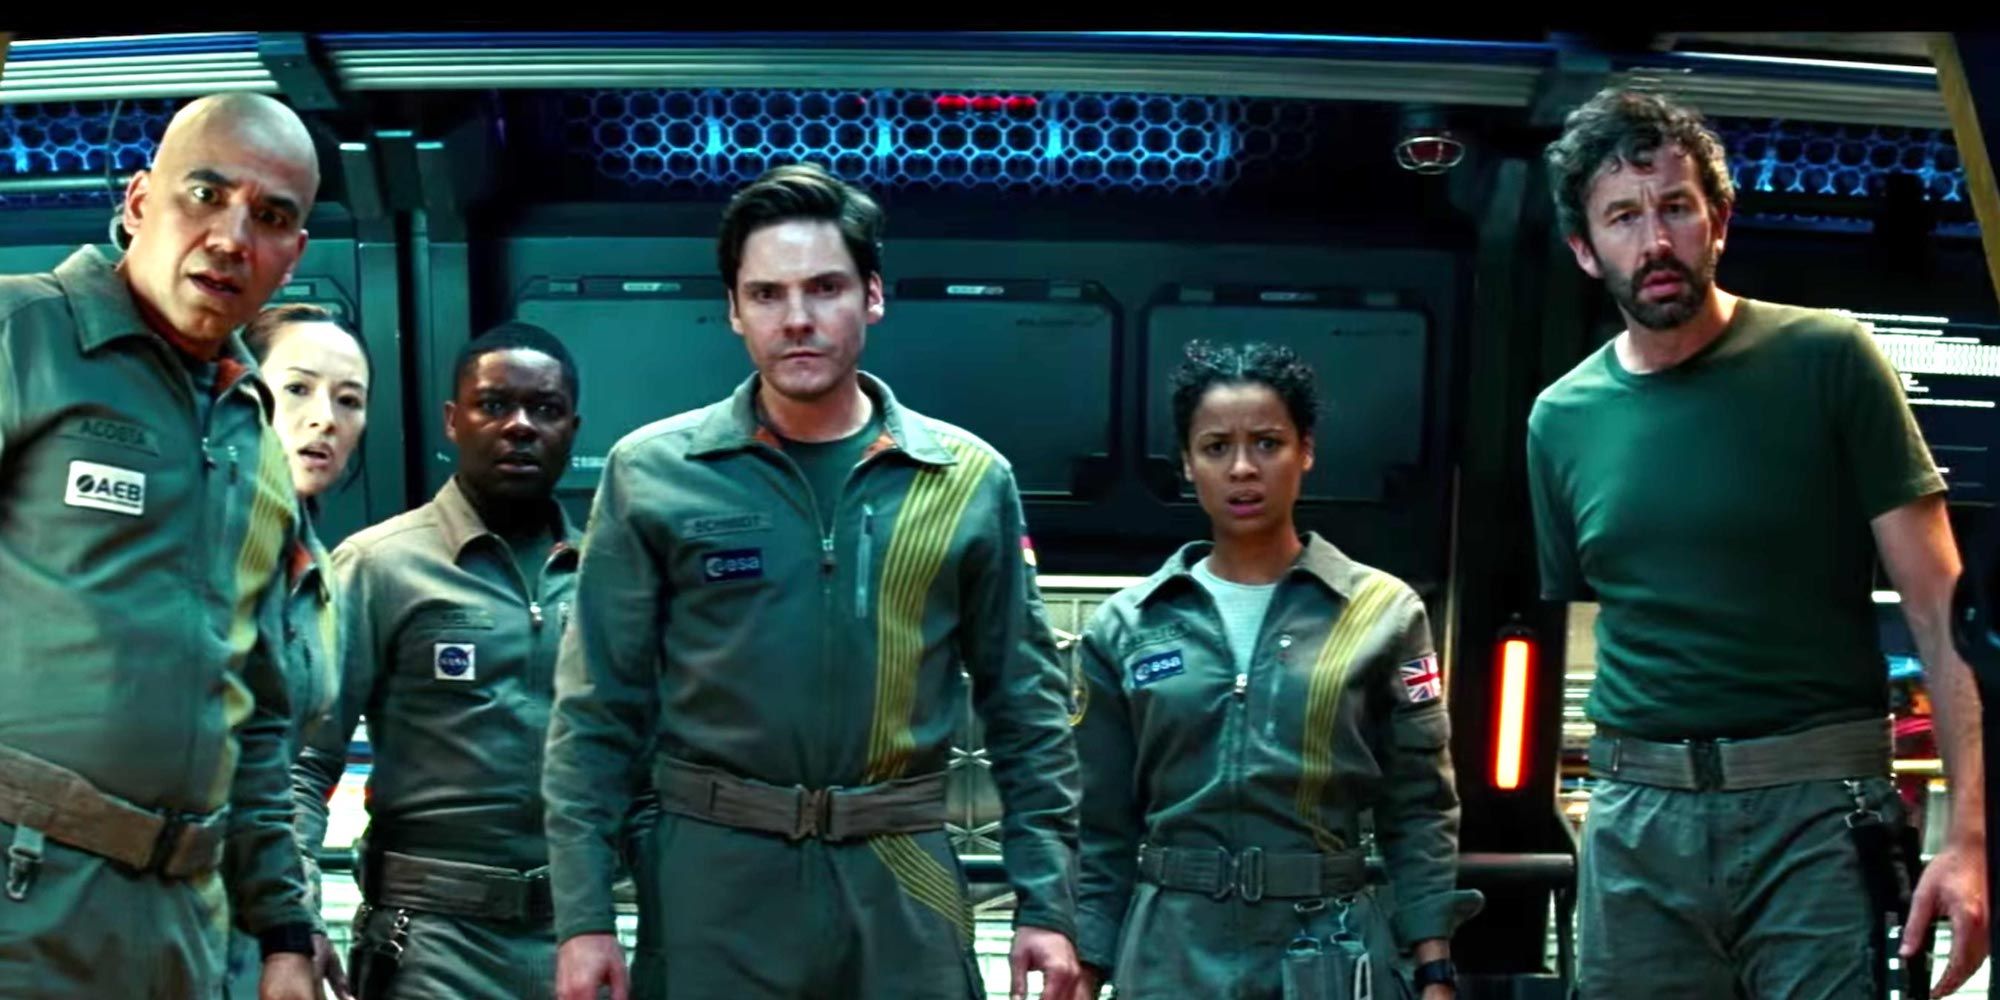 How Cloverfield Paradox’s Surprise Release May Affect Hollywood